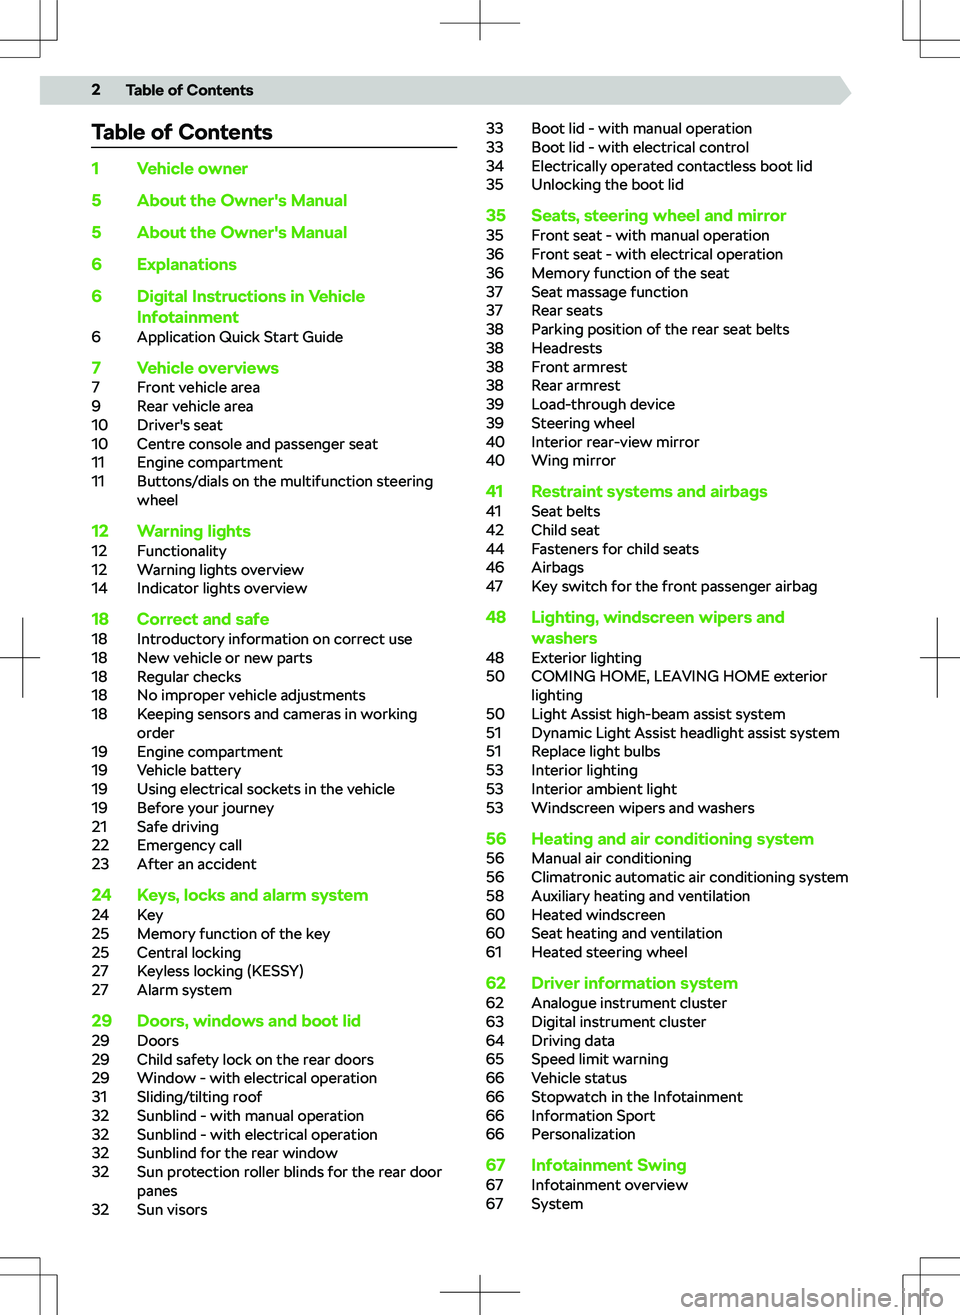 SKODA SUPERB 2017  Owner´s Manual Table of Contents1Vehicle owner5About the Owner